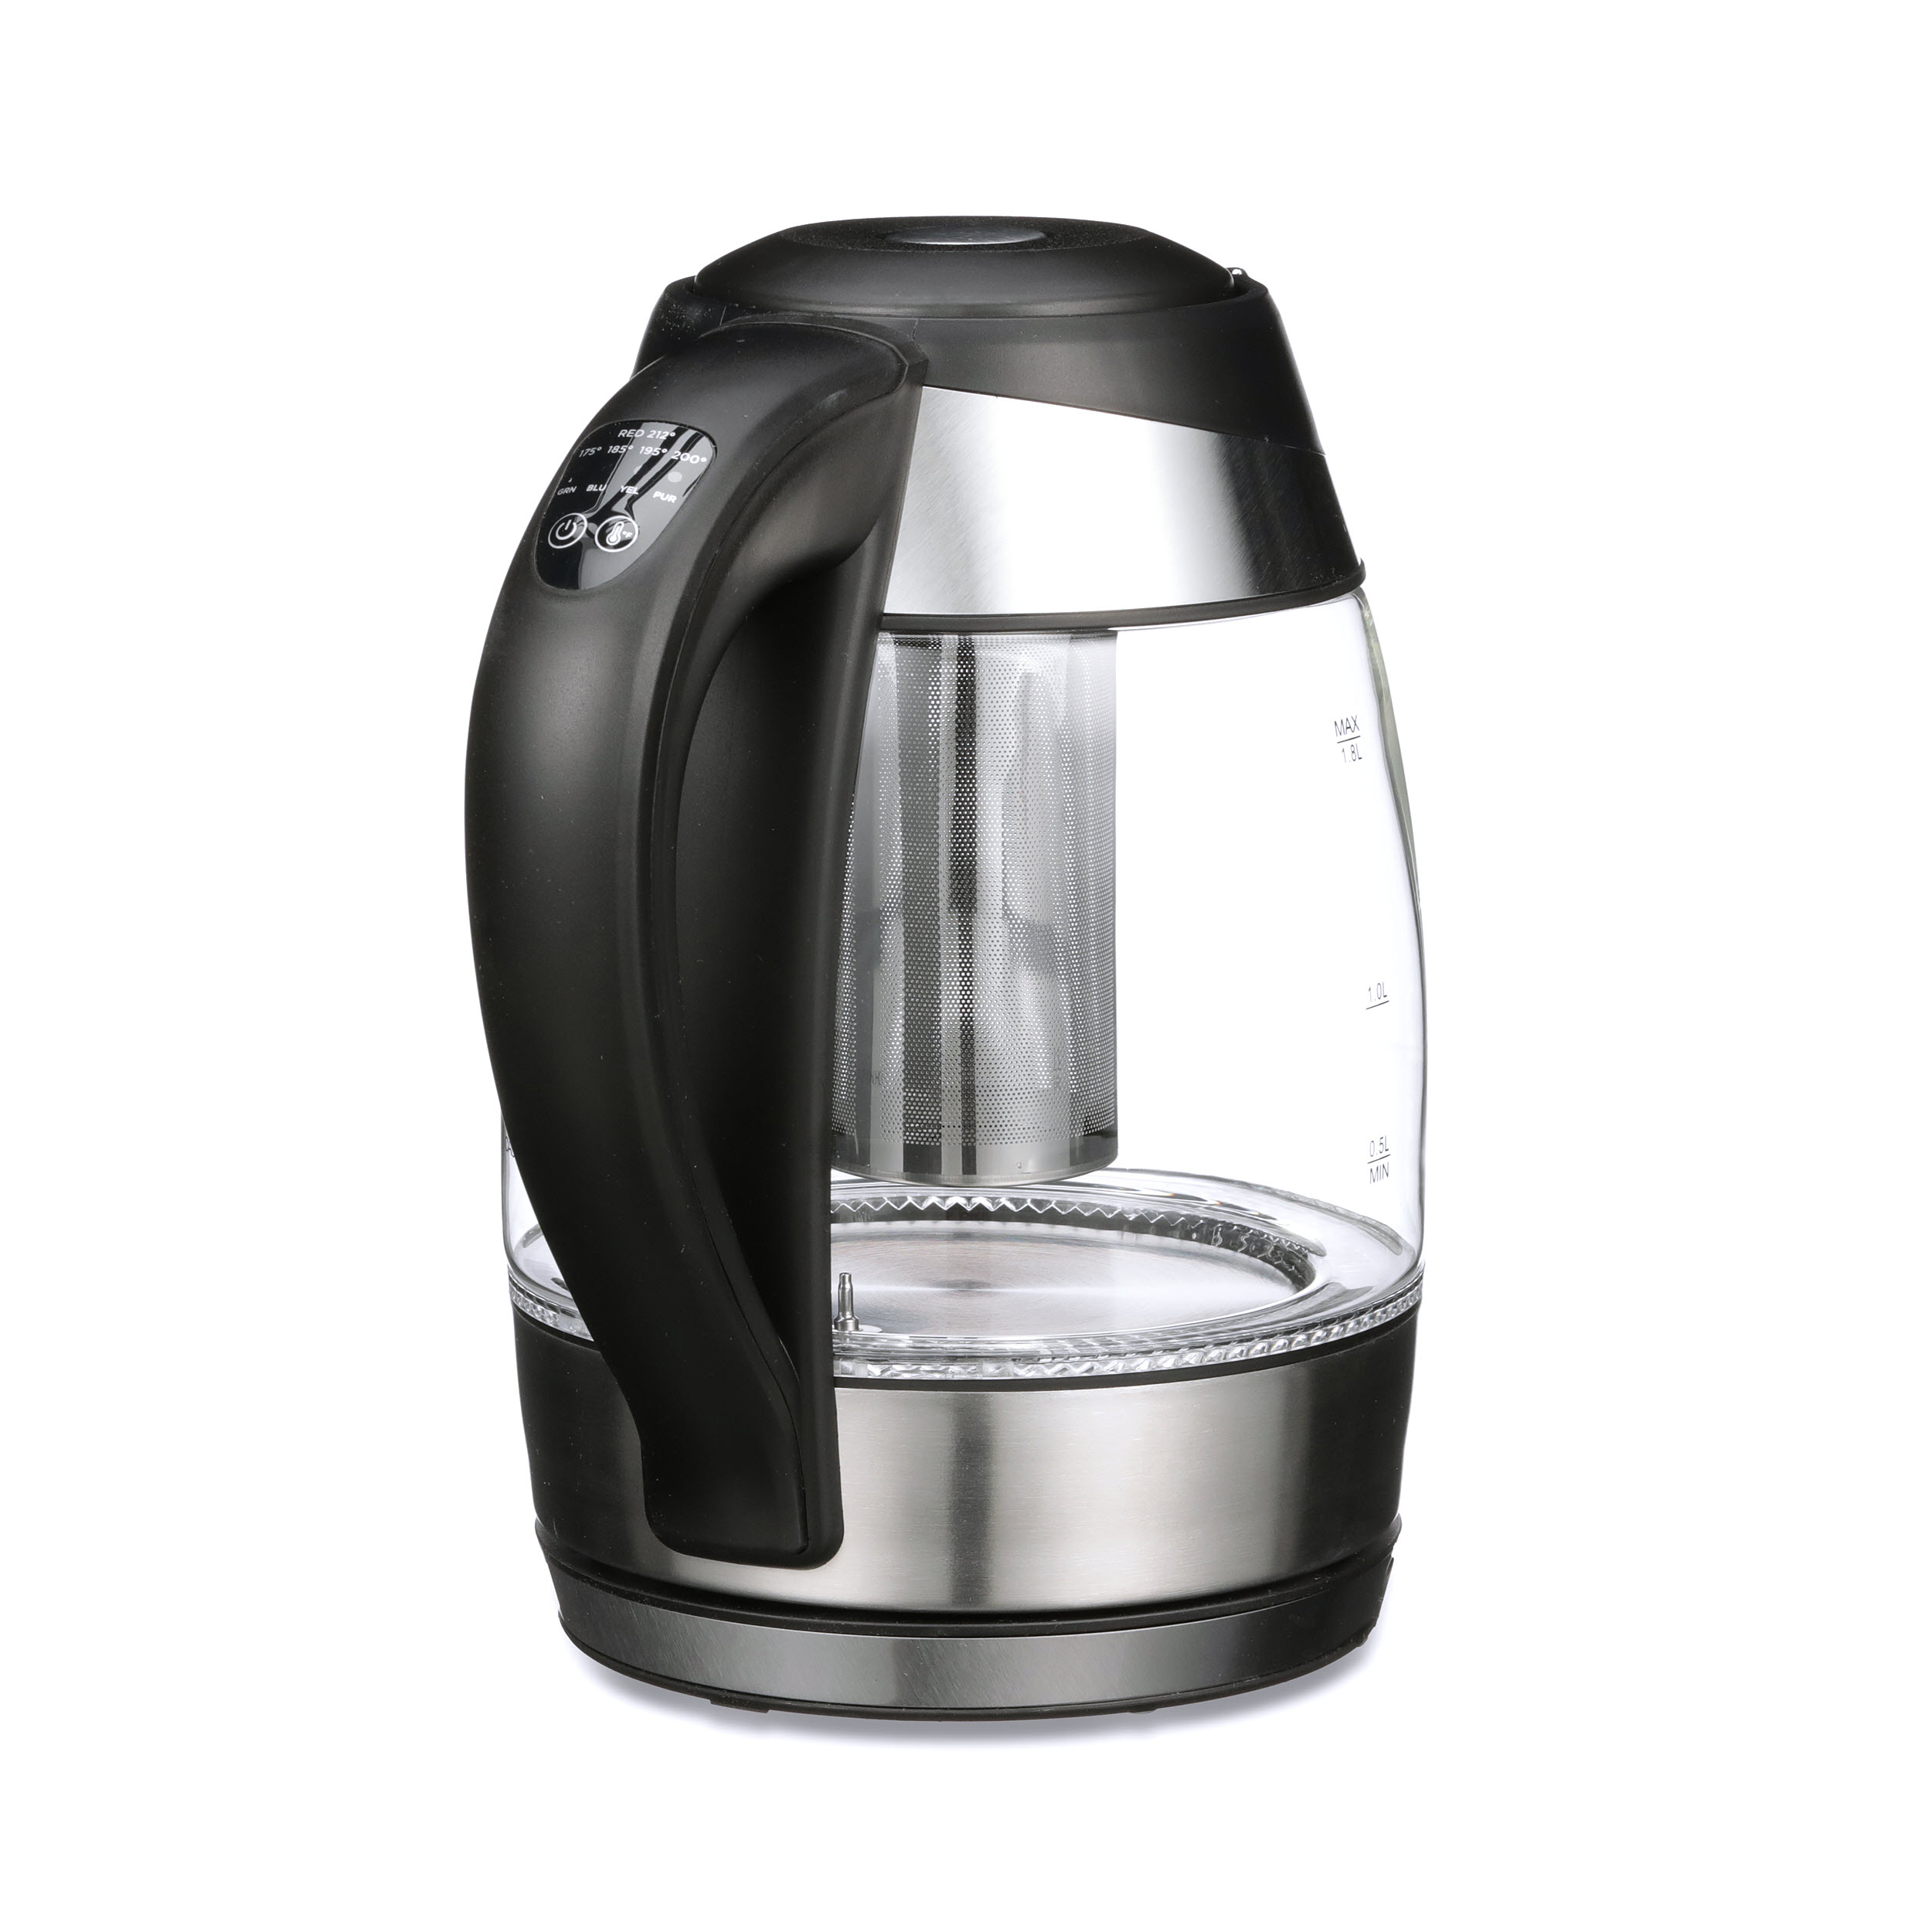 Chefman 1.8 Liter Electric Glass Kettle With Removable Tea Infuser, Op –